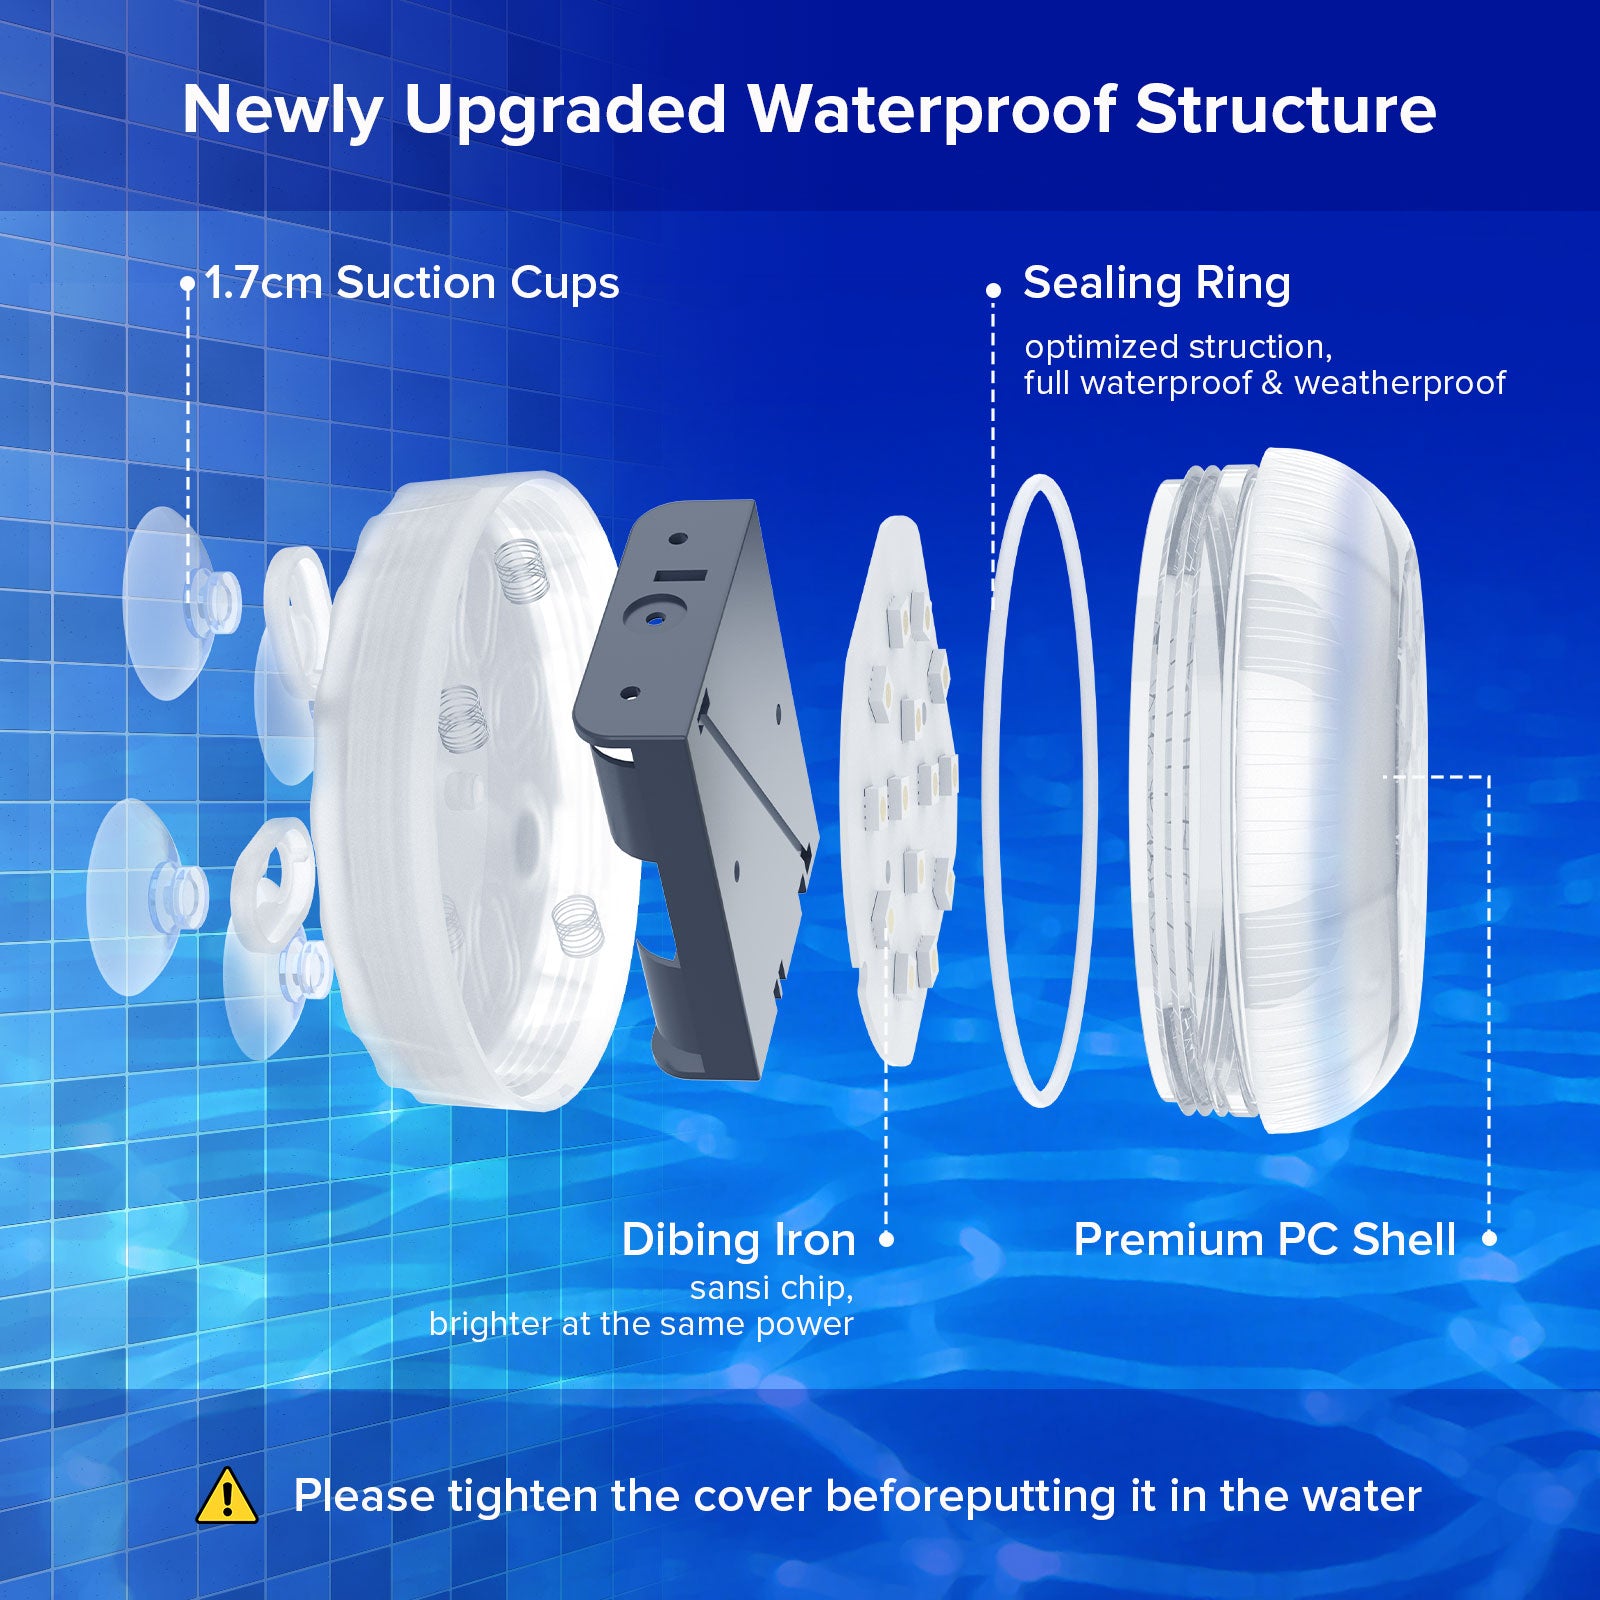 RGB LED Submersible Pool Light (US ONLY) has newly upgraded waterproof structure.